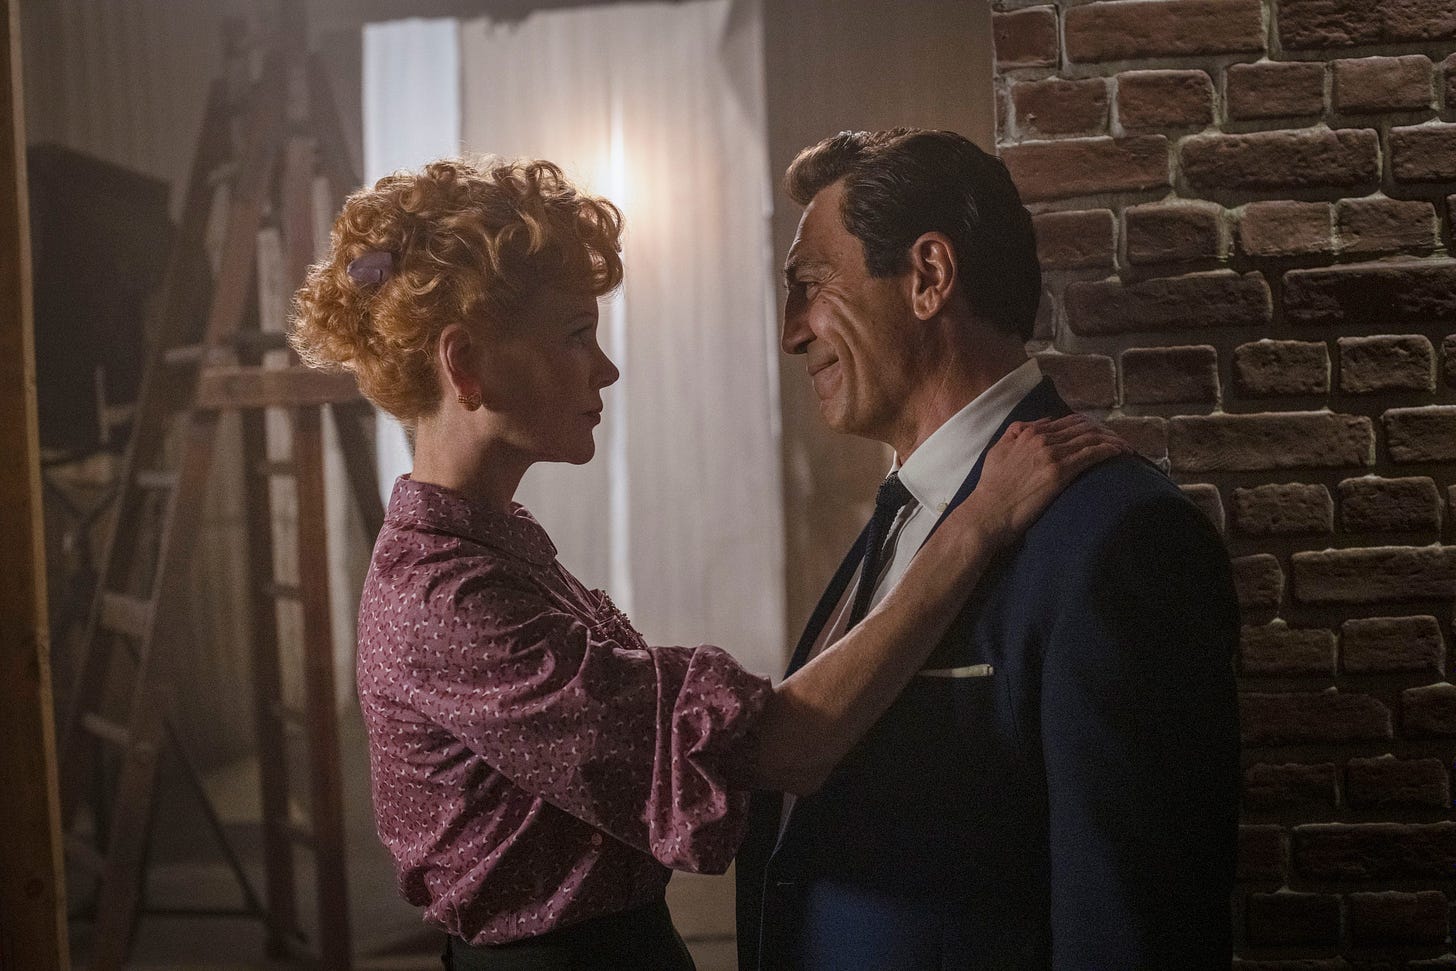 Nicole Kidman and Javier Bardem as Lucille Ball and Desi Arnez in Being The Ricardos